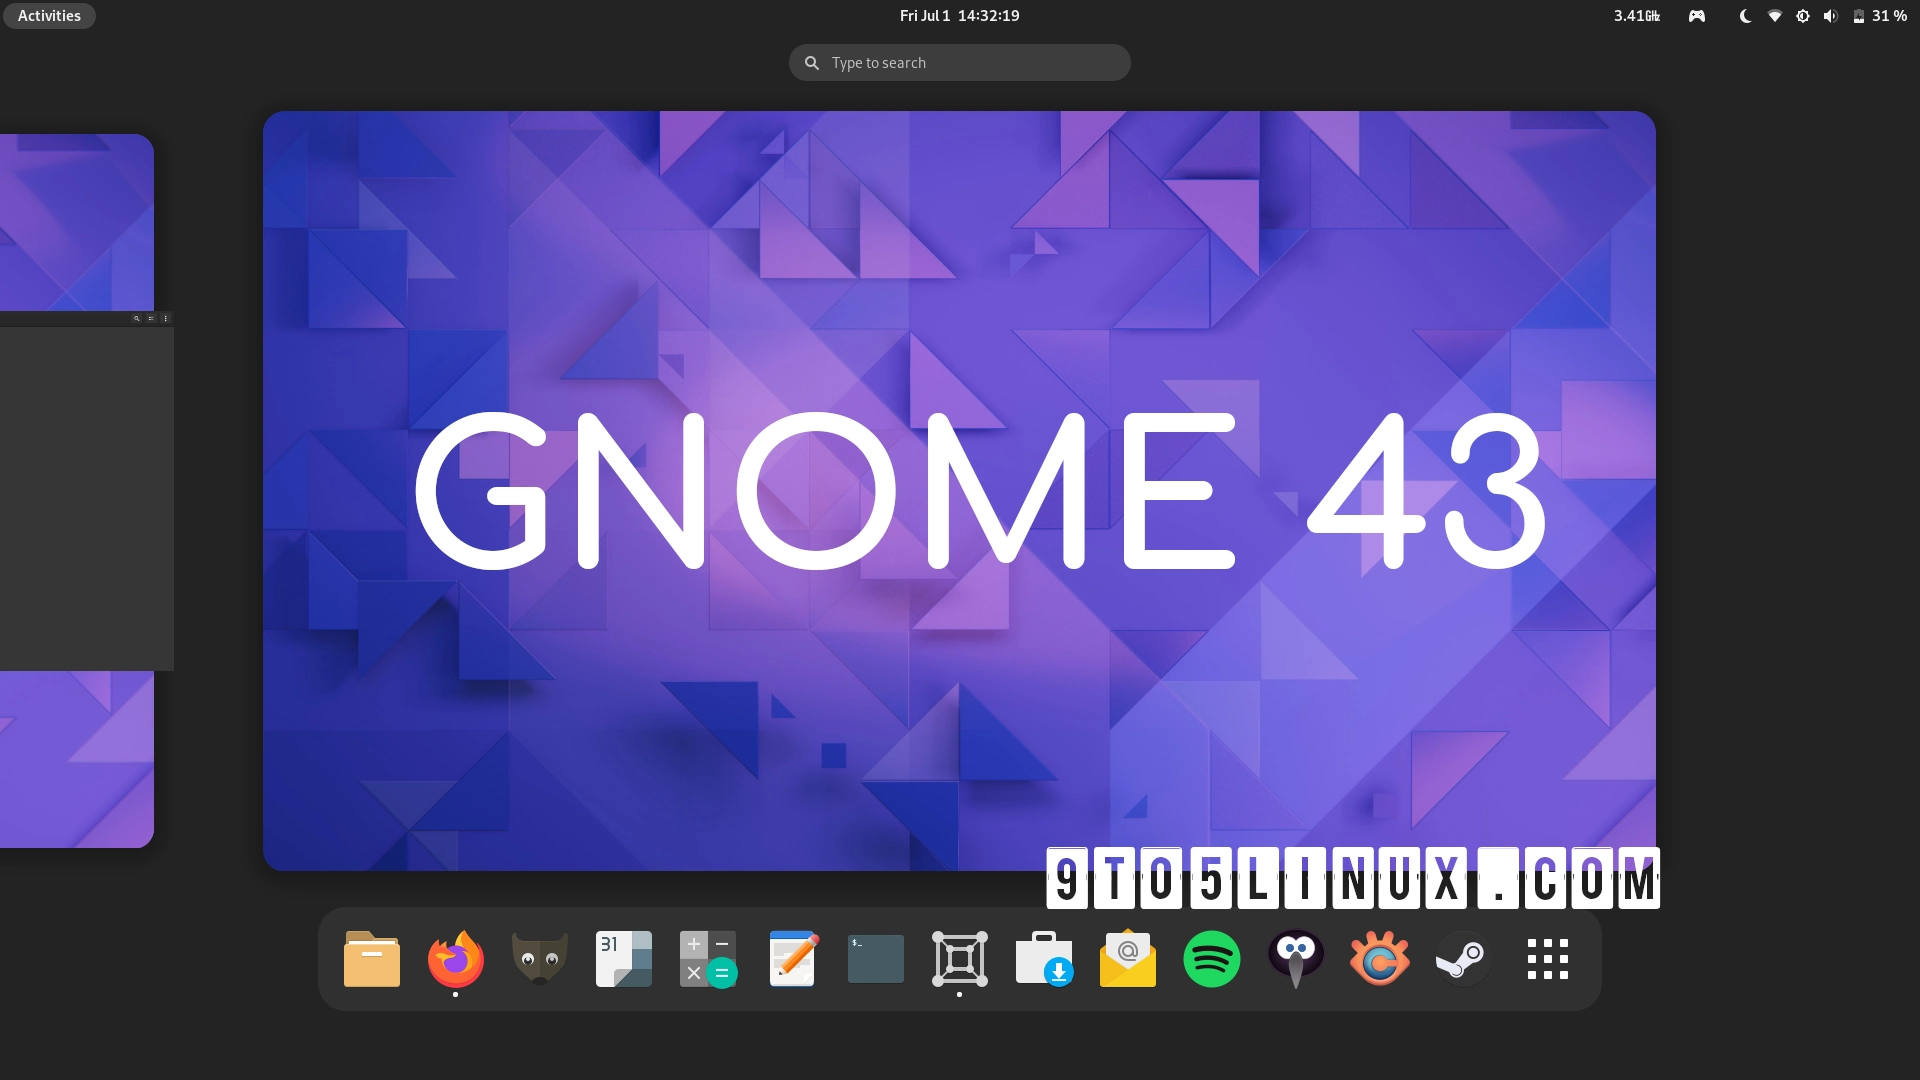 GNOME 43 to Bring Support for Web Apps in Software, New Device Security Info Panel